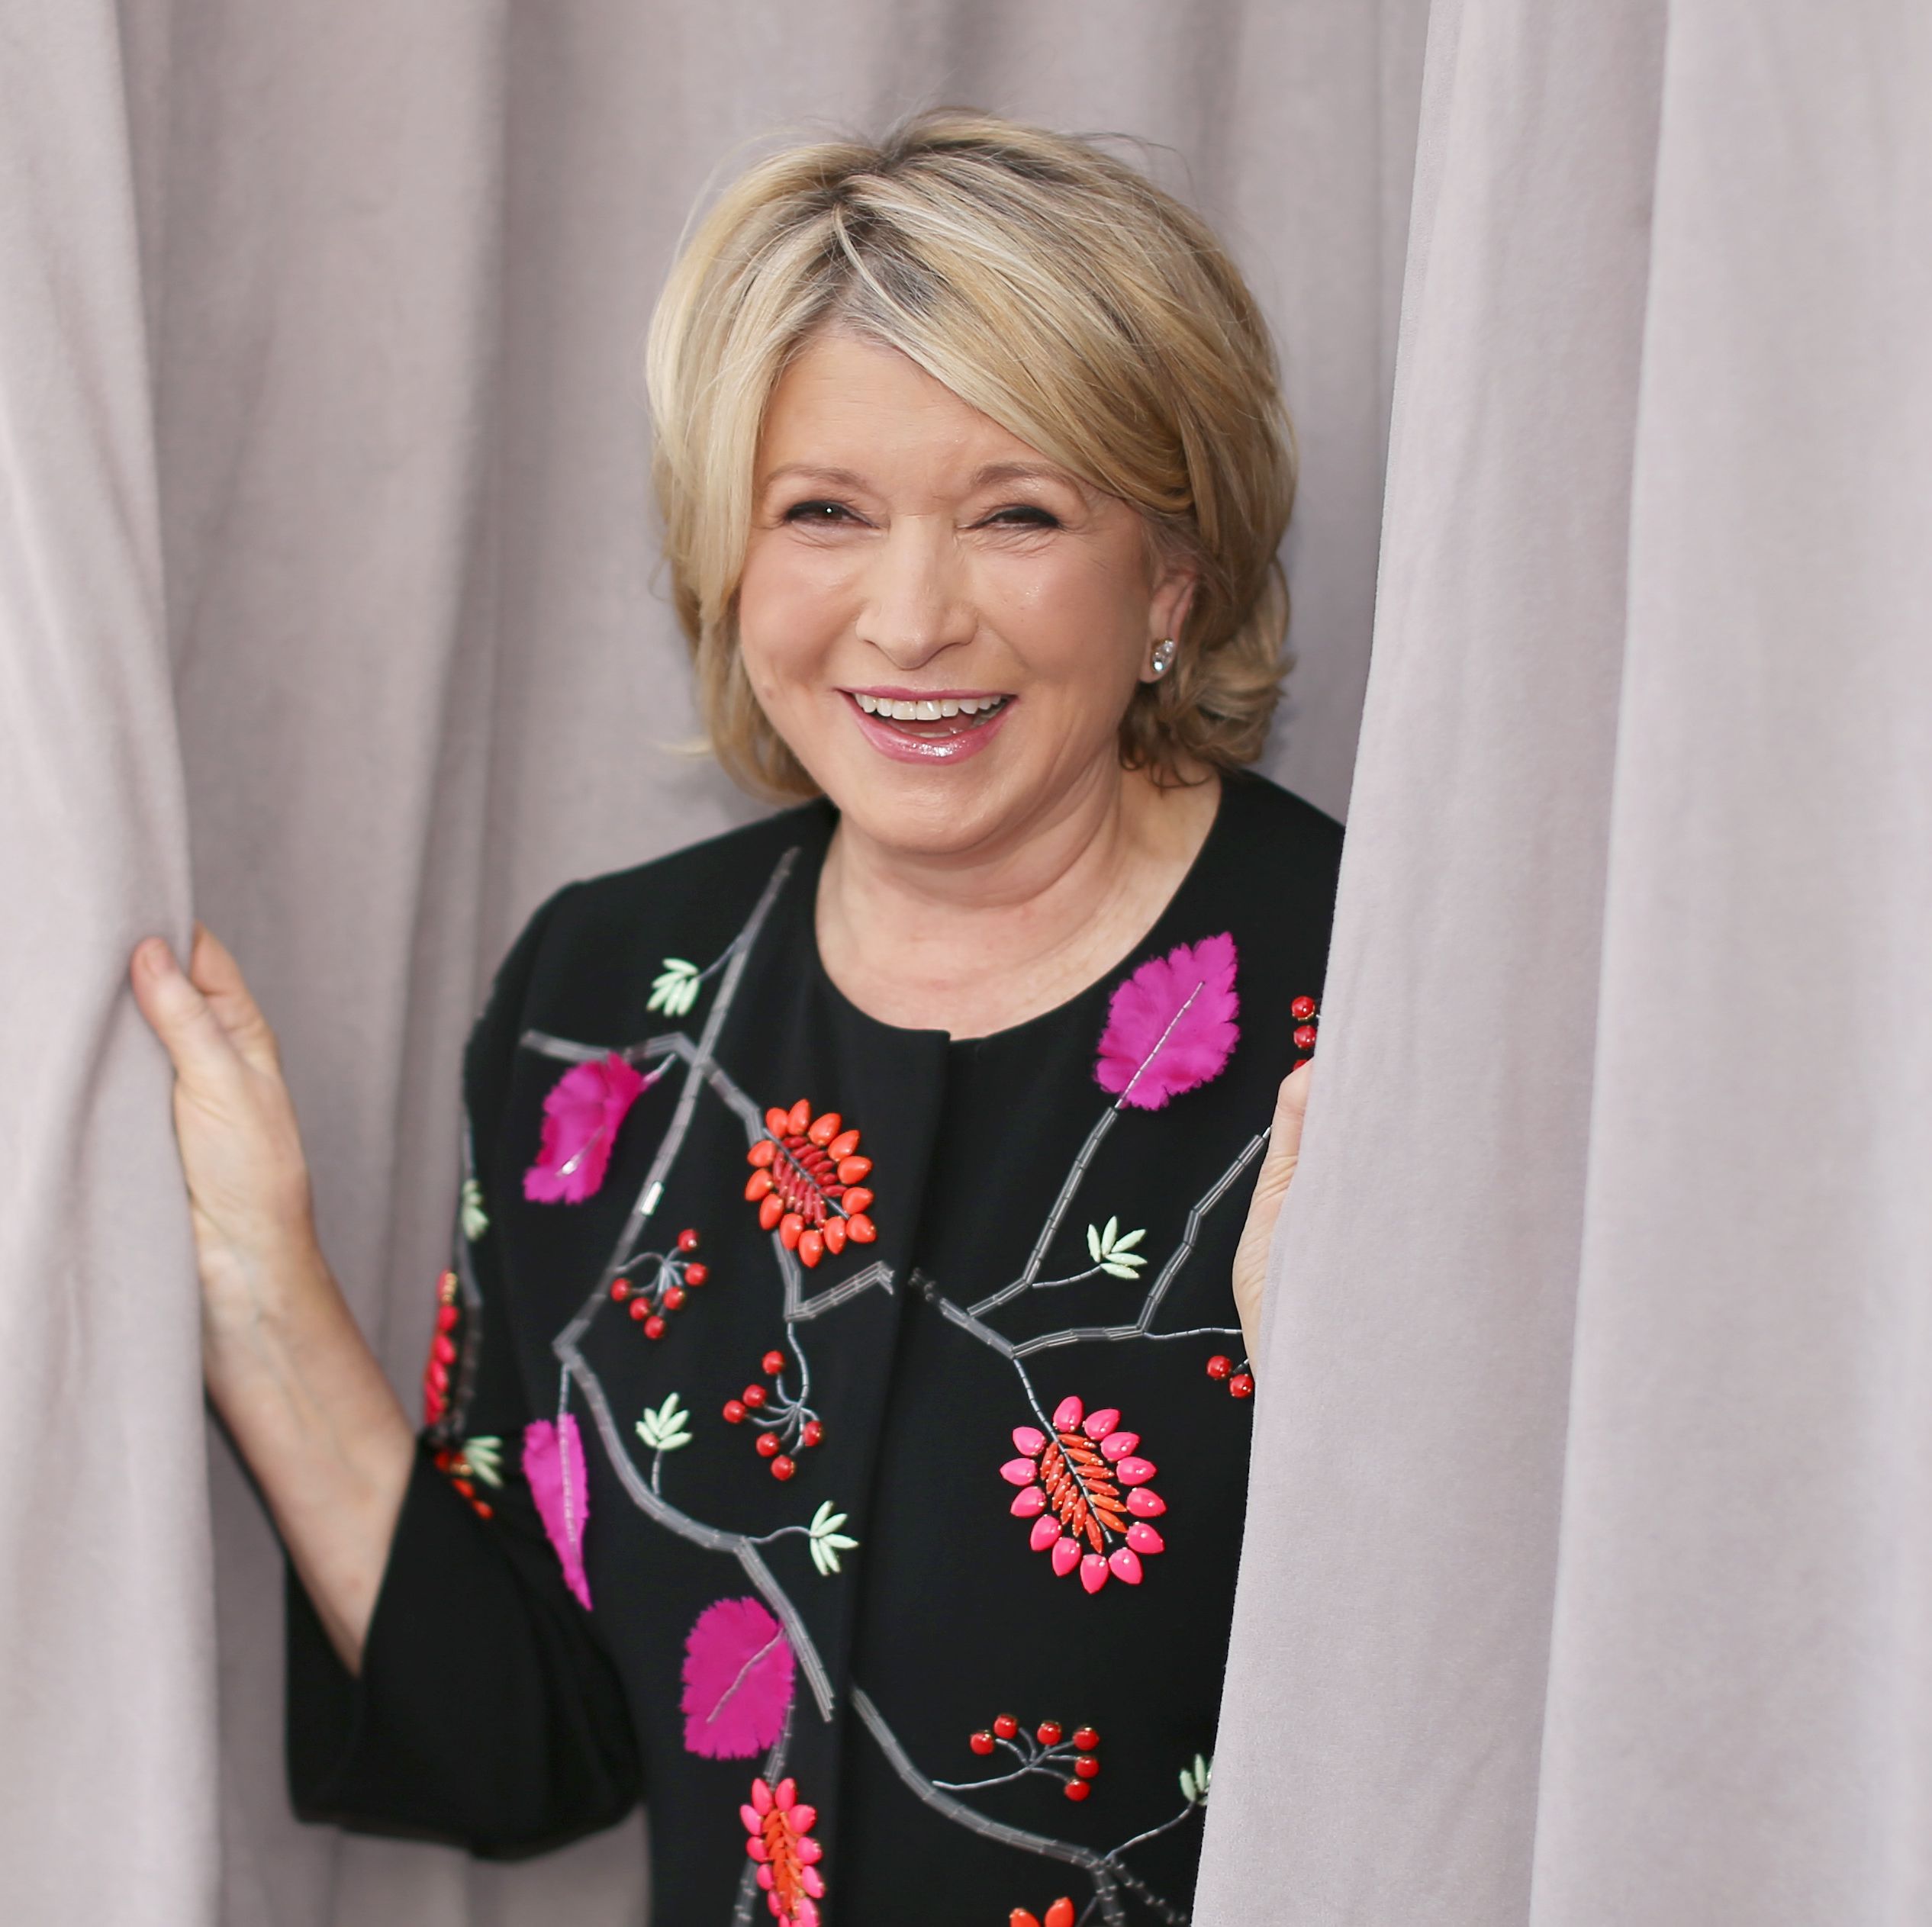 Martha Stewart Is the Cover Star of 'Sports Illustrated's Swimsuit Issue at Age 81, Breaking Records